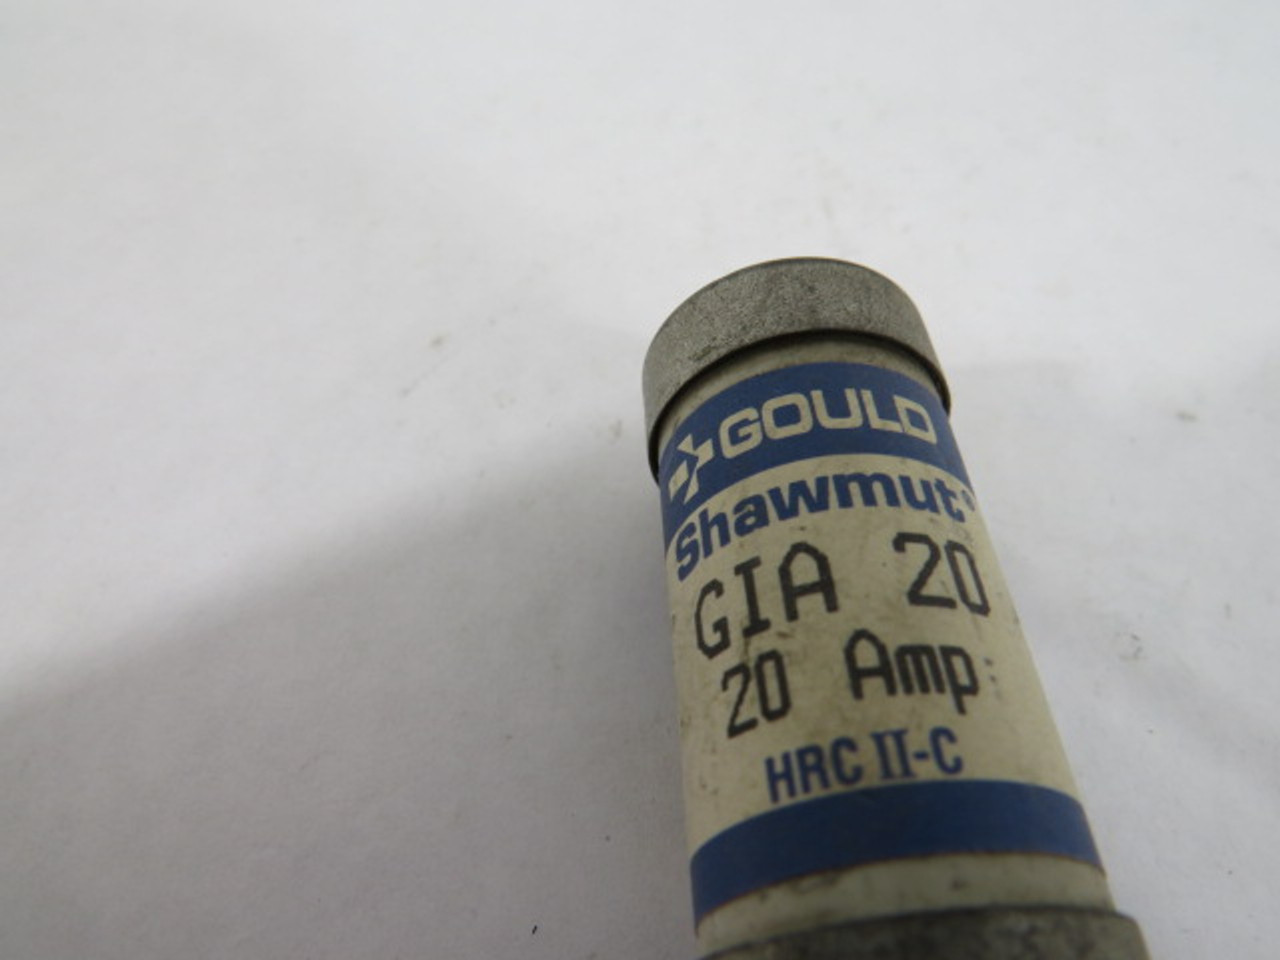 Gould GIA20 Bolt on Fuse 20A 600V USED